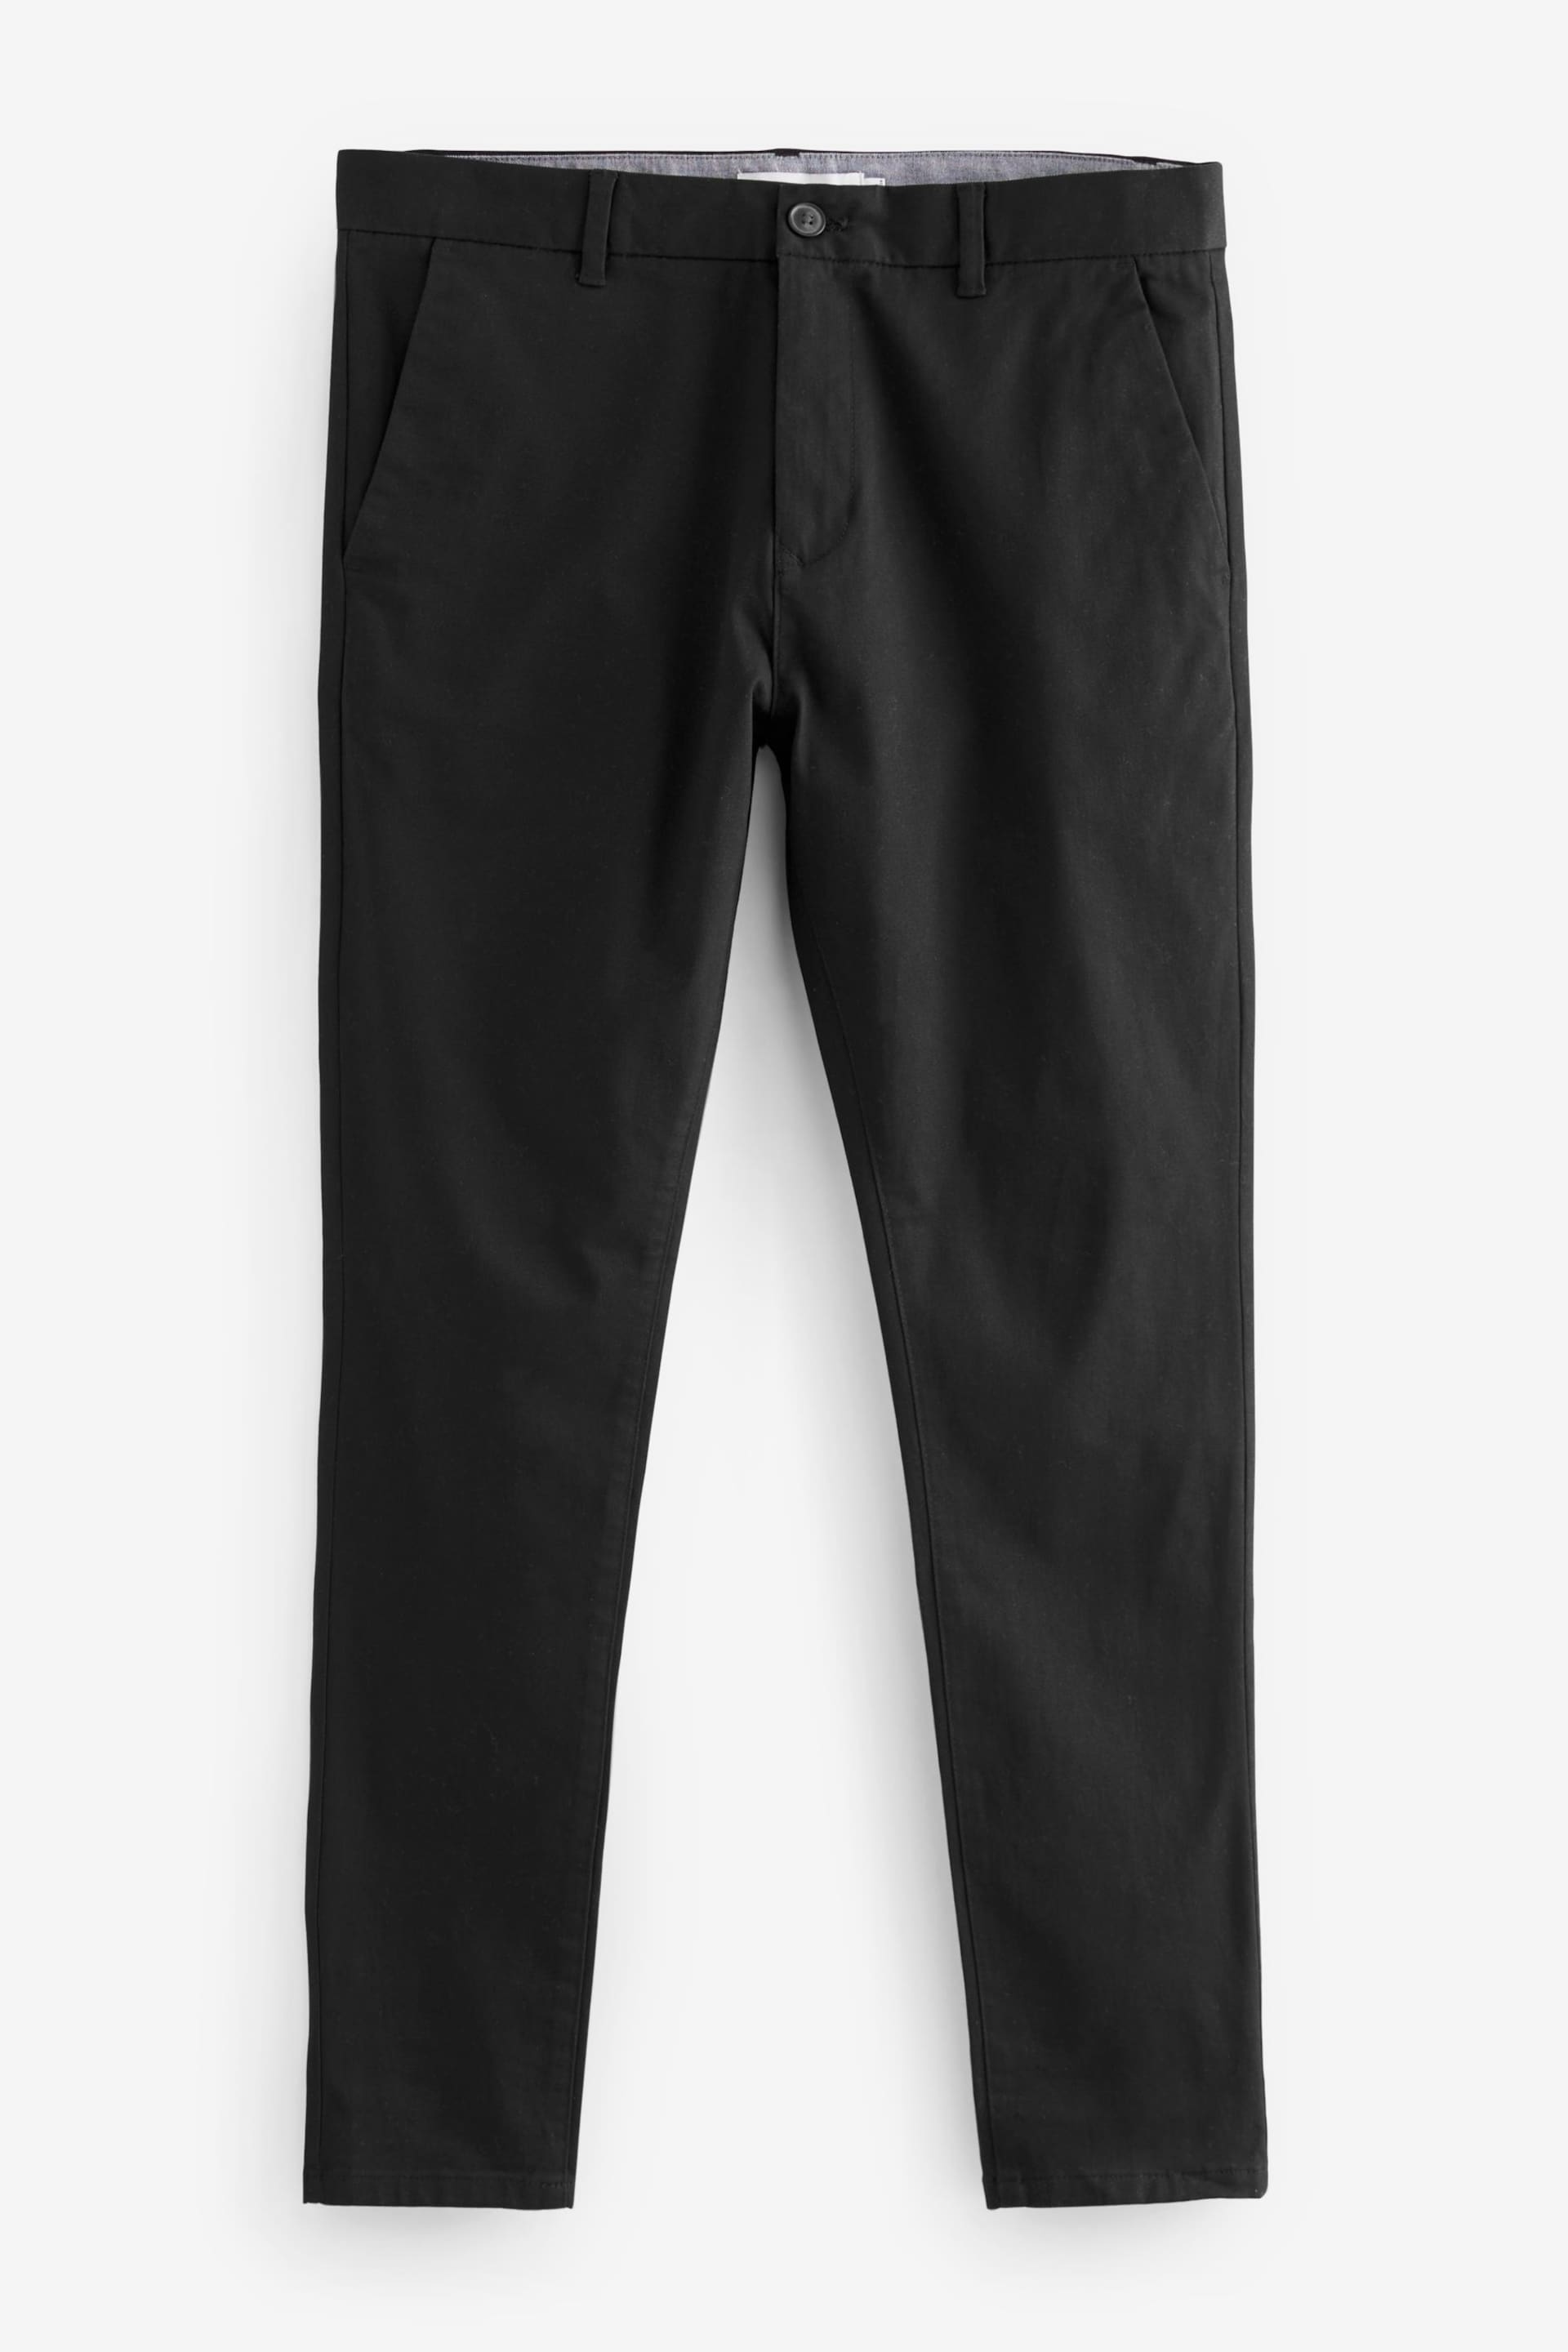 Black Skinny Stretch Chino Trousers 2 Pack - Image 8 of 9